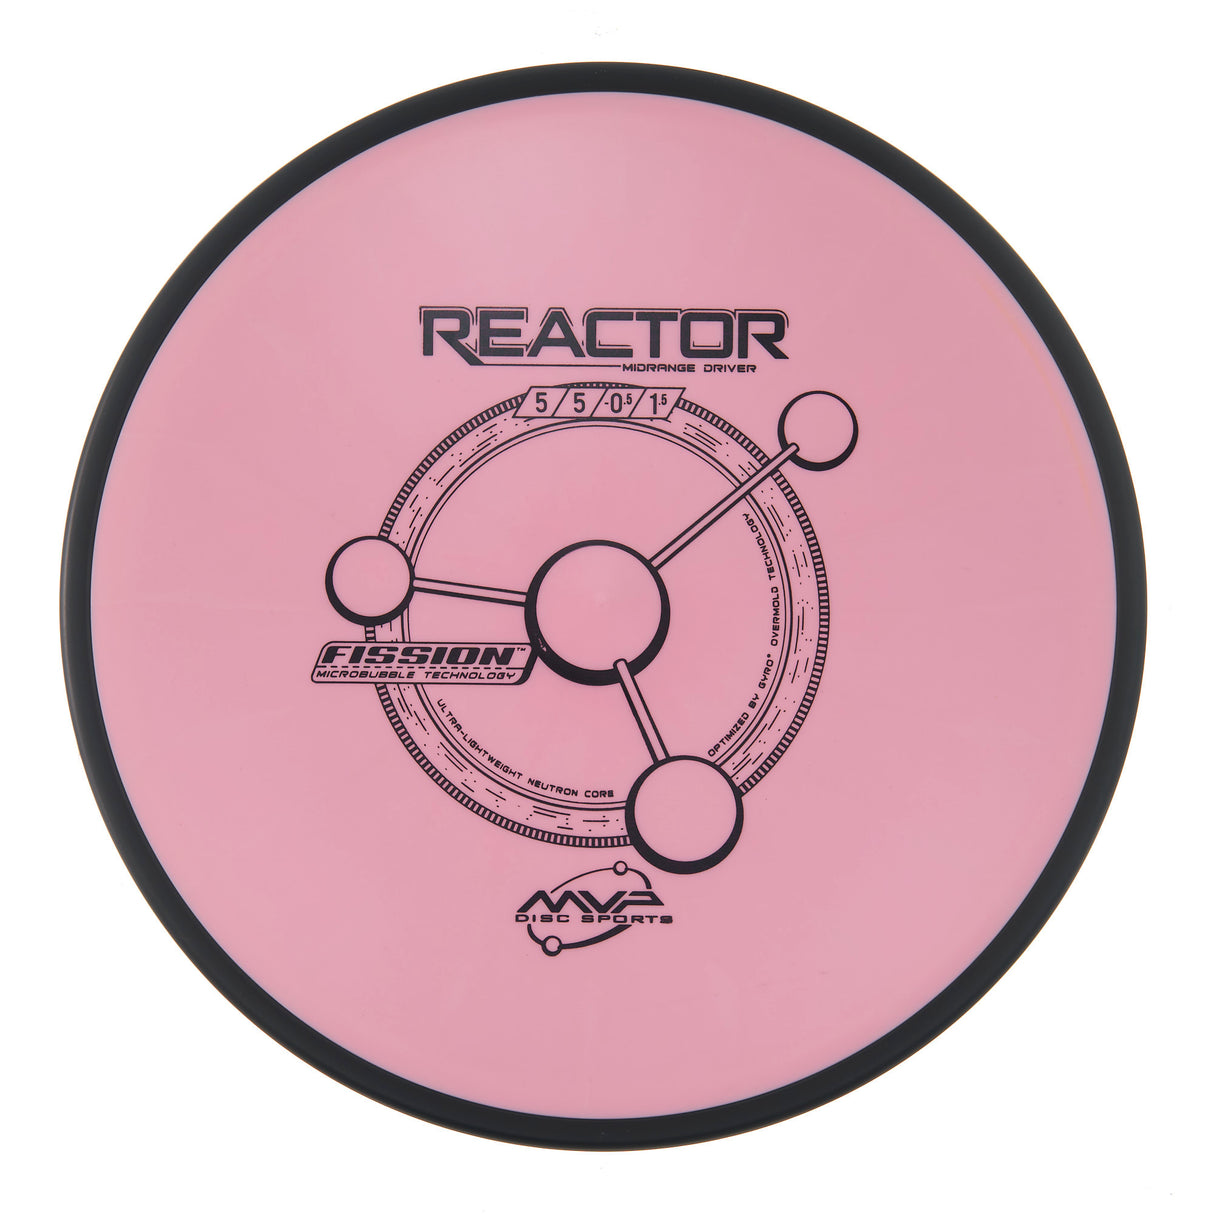 MVP Reactor - Fission 161g | Style 0003